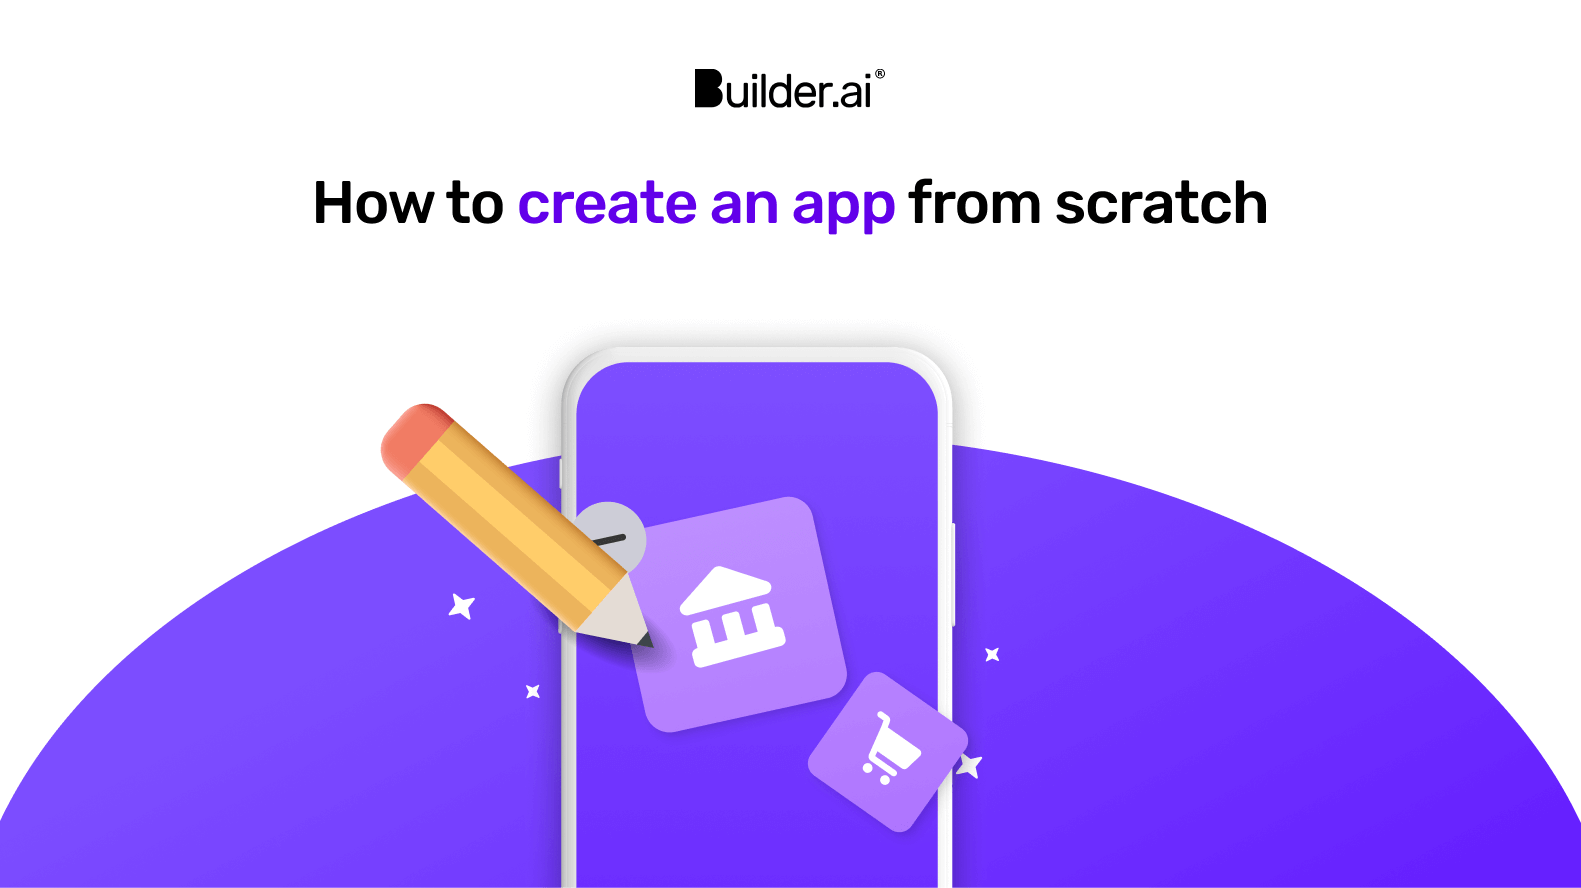 How to create an app from scratch